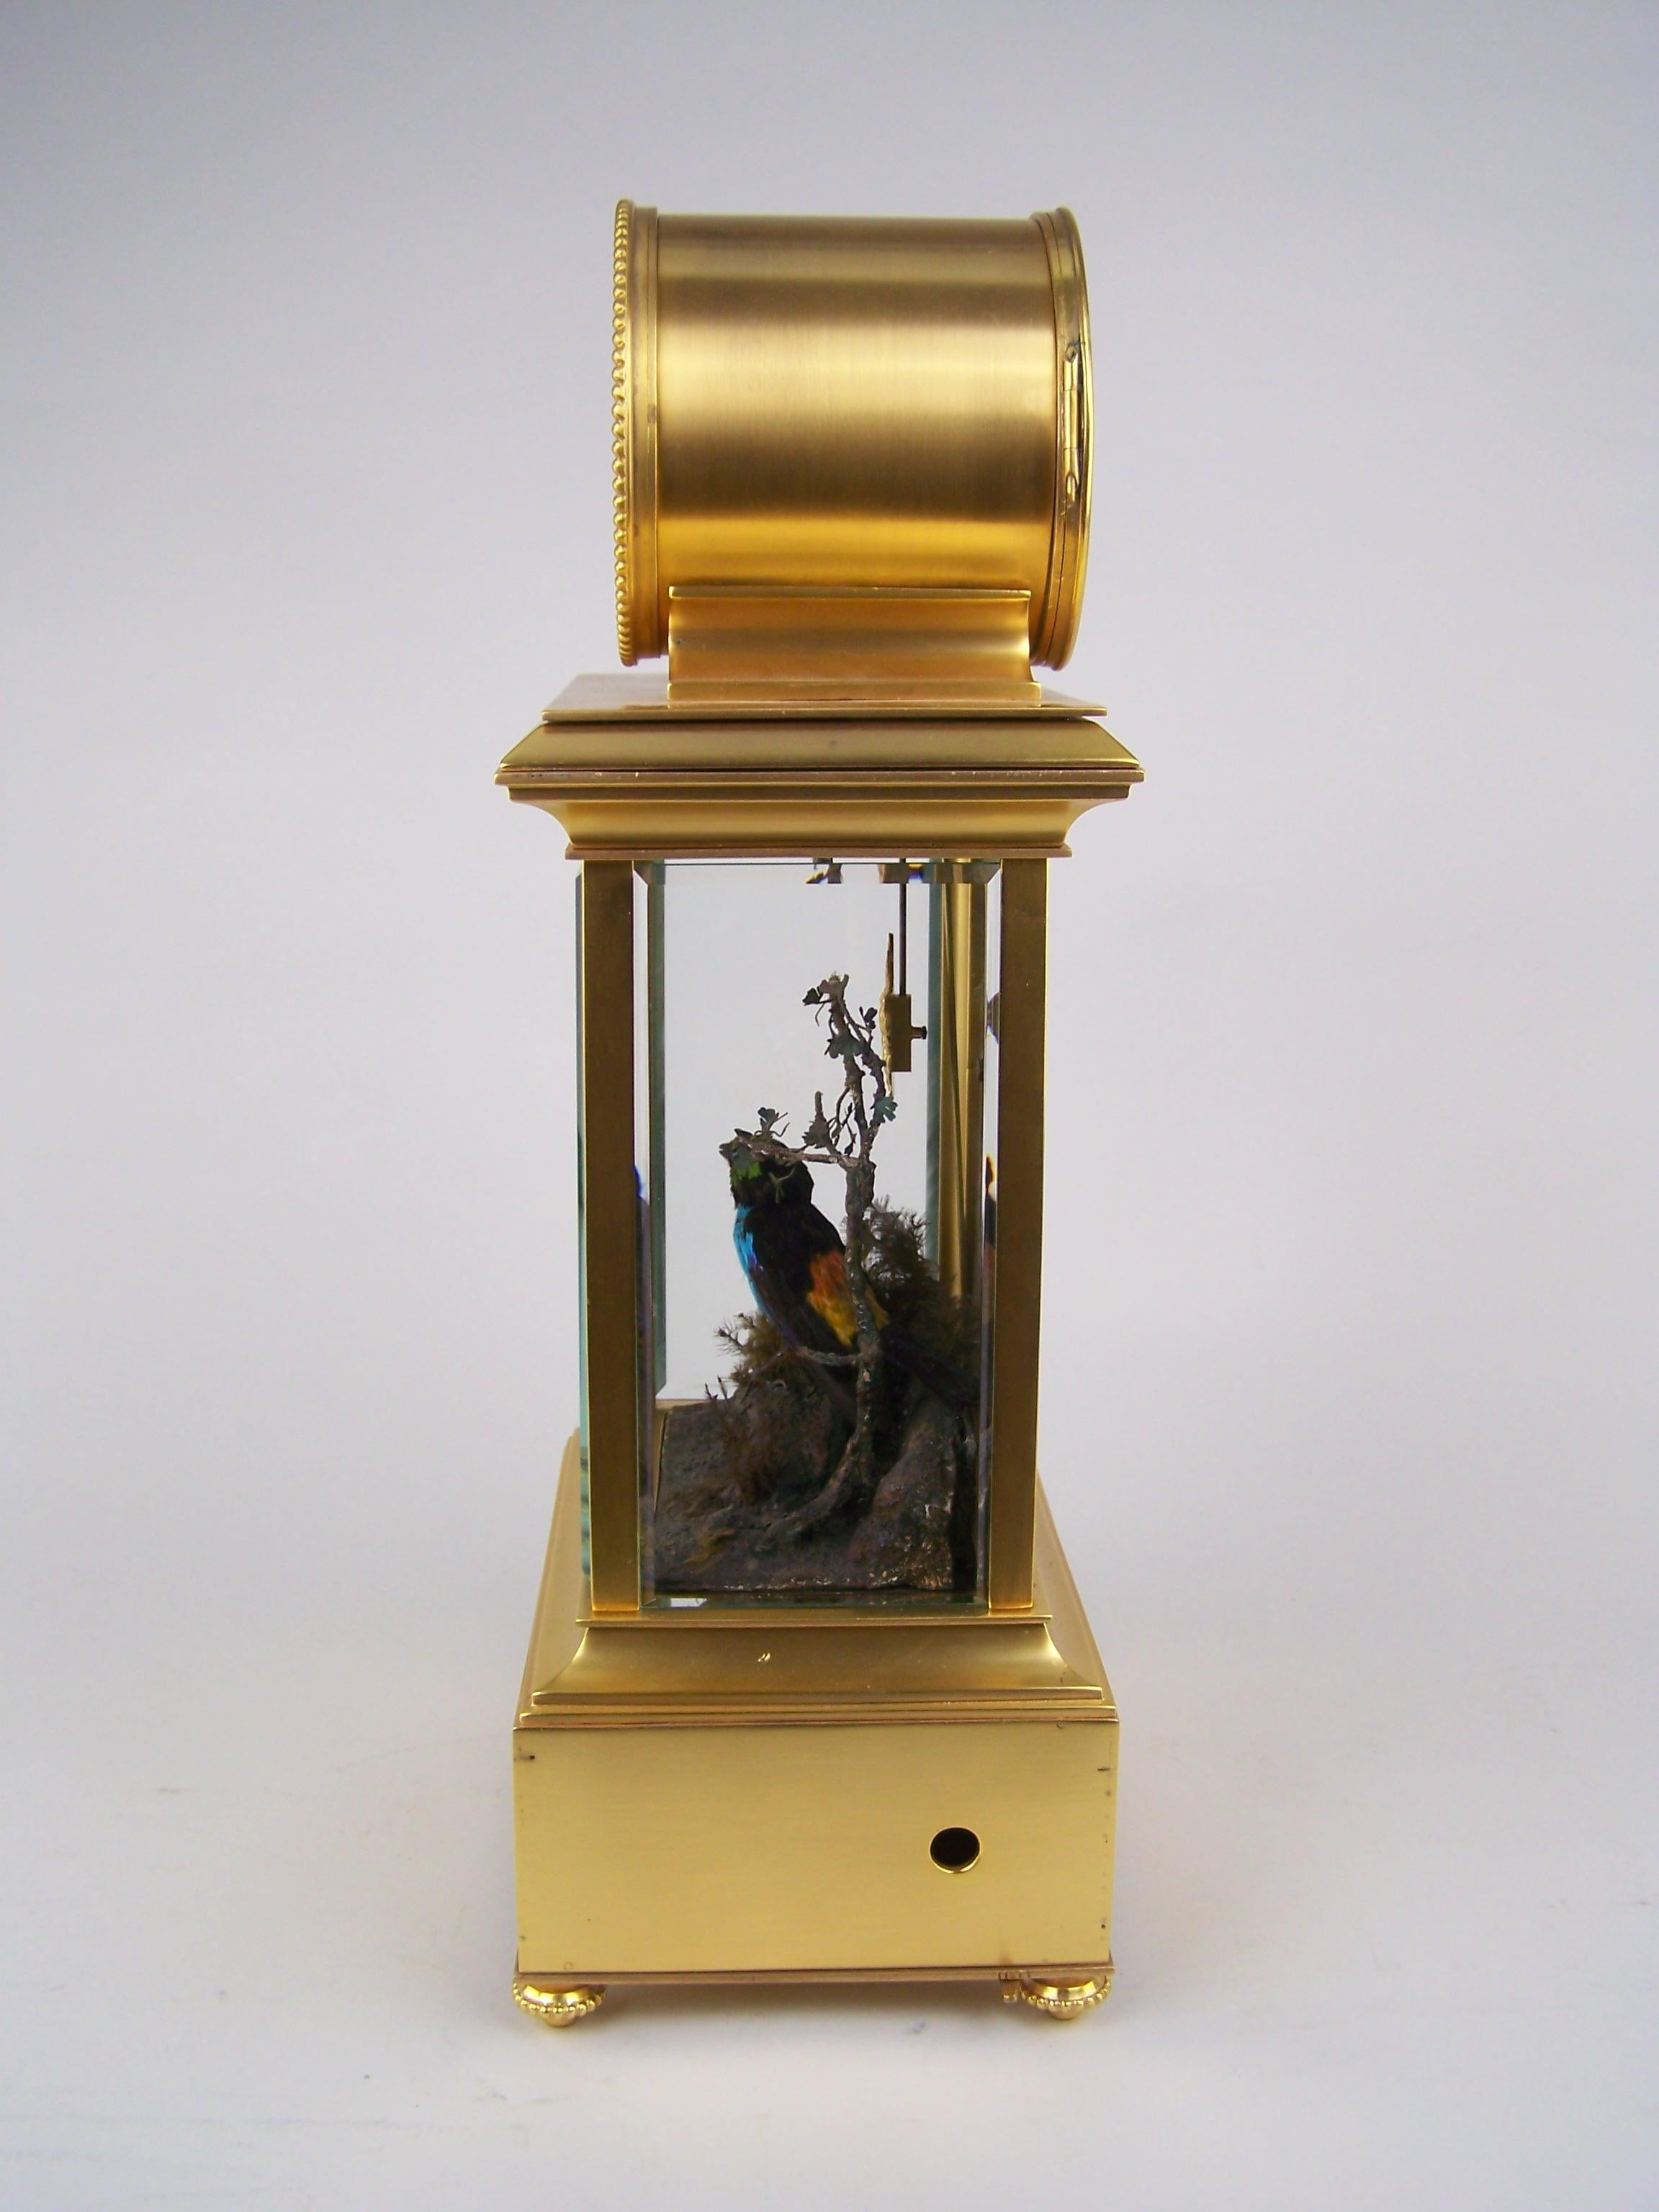 Metalwork Clock with Singing Bird Automaton by Bontems For Sale